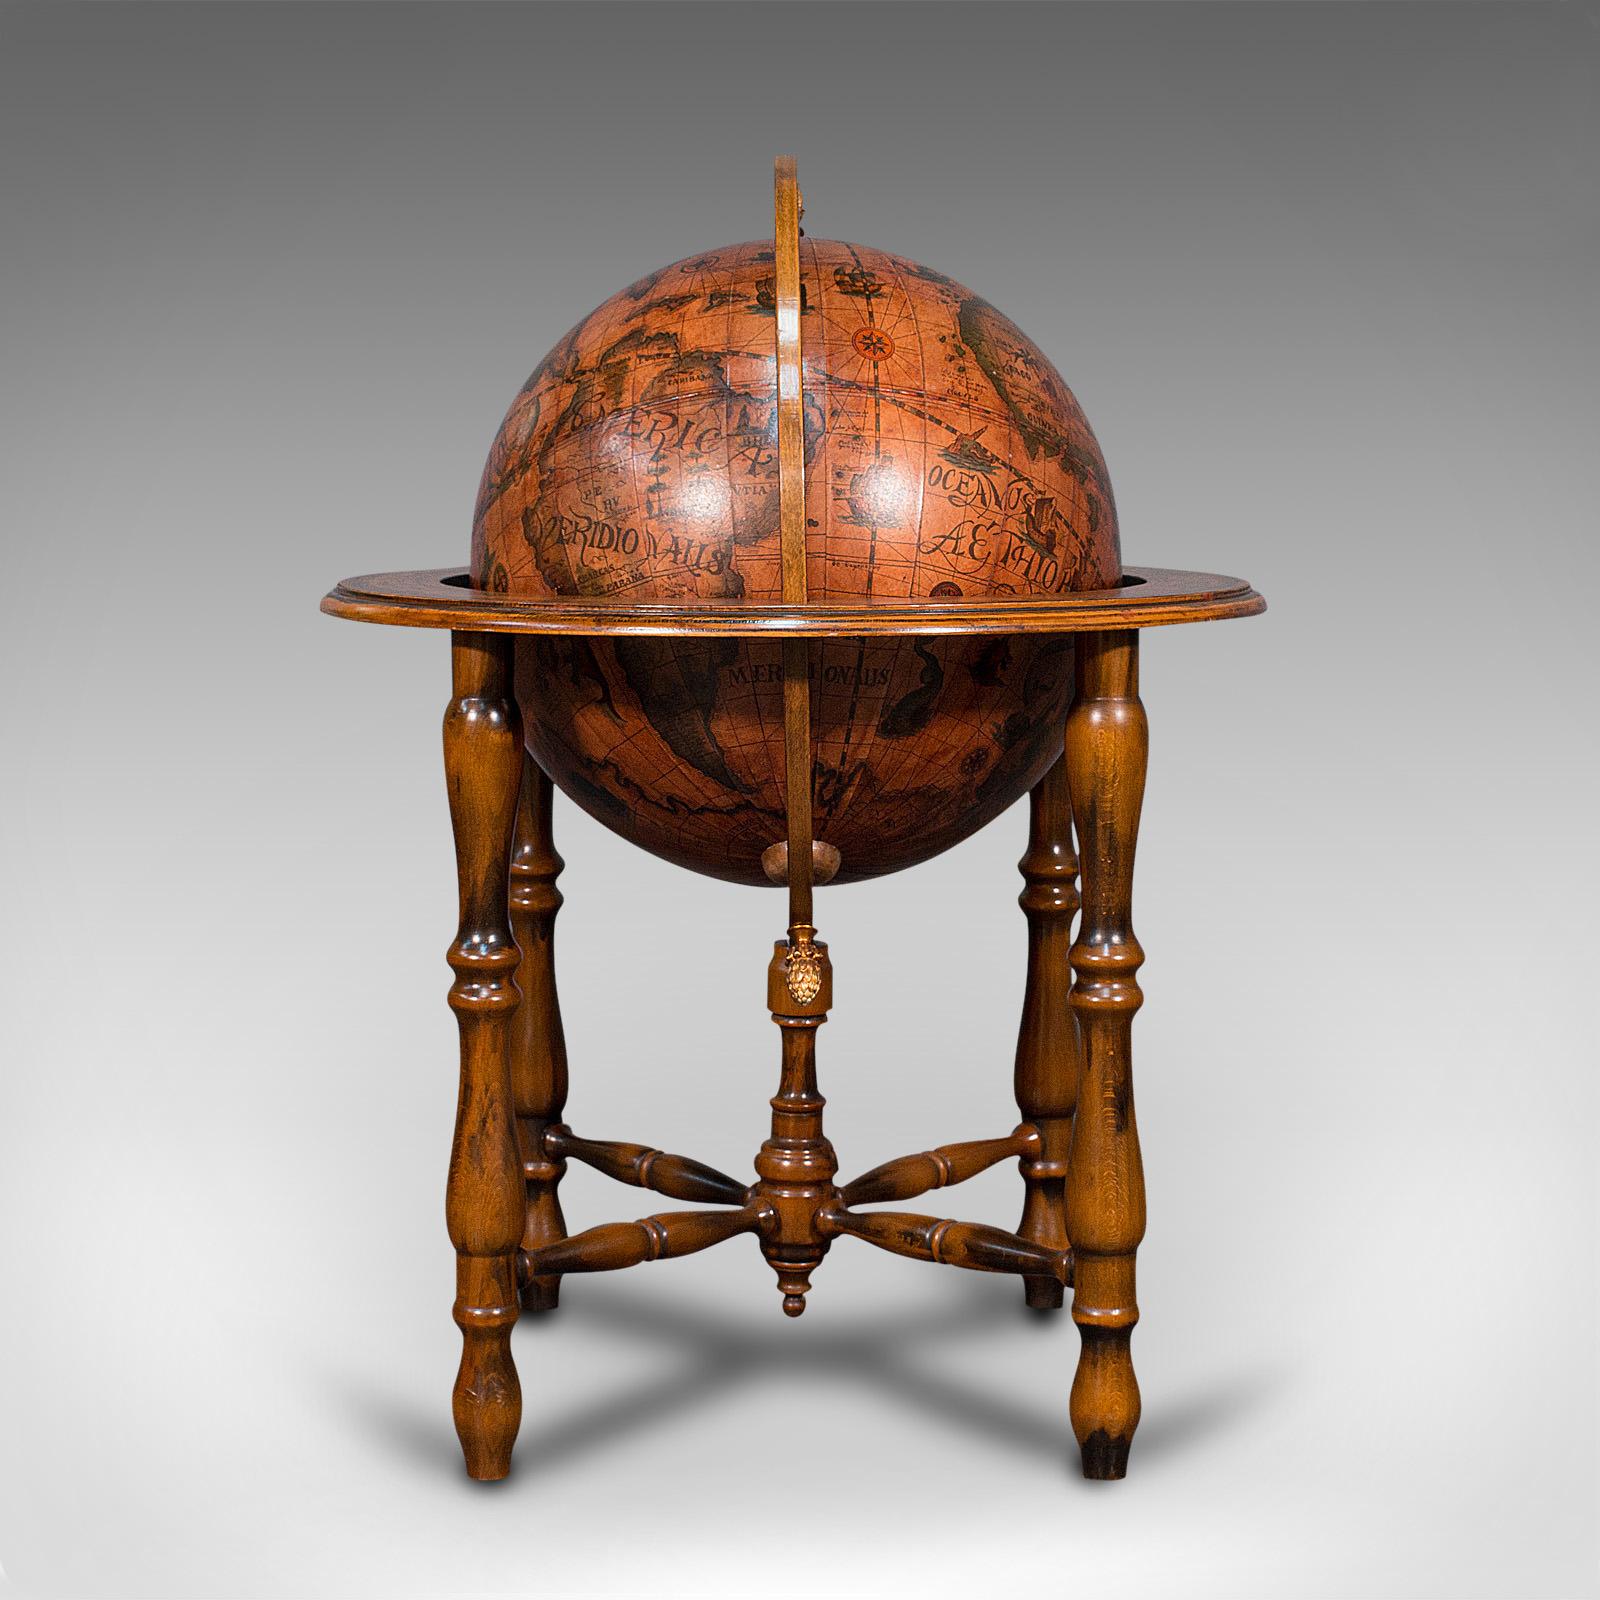 20th Century Large Vintage Terrestrial Globe, Continental, Beech, Rotating, Late 20th.C, 1970